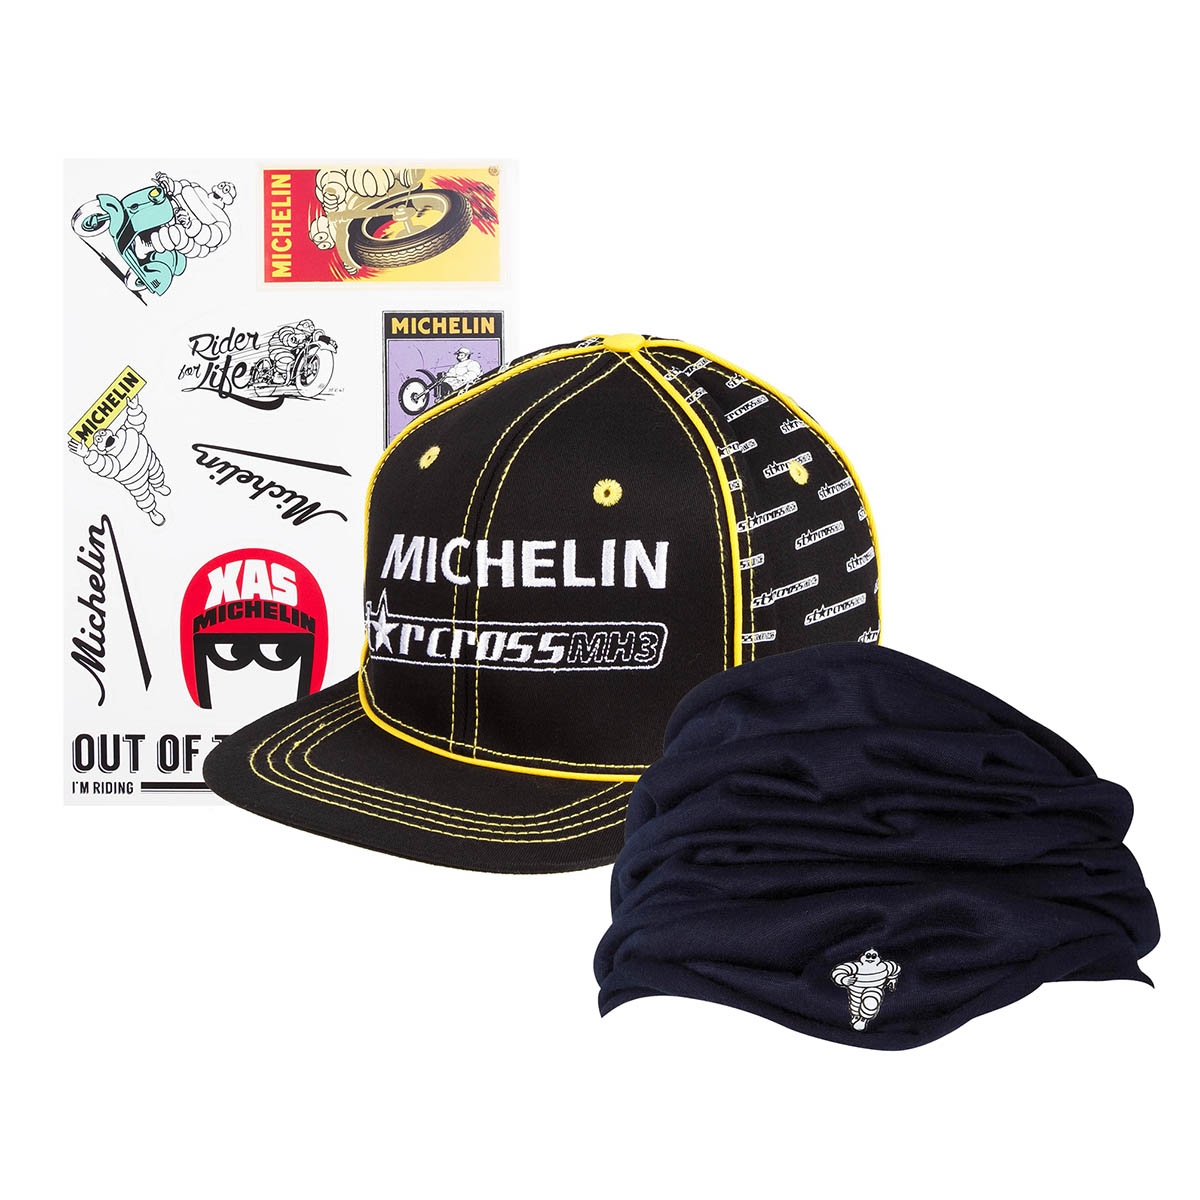 Michelin Hose scarf incl. Cap and sticker sheet